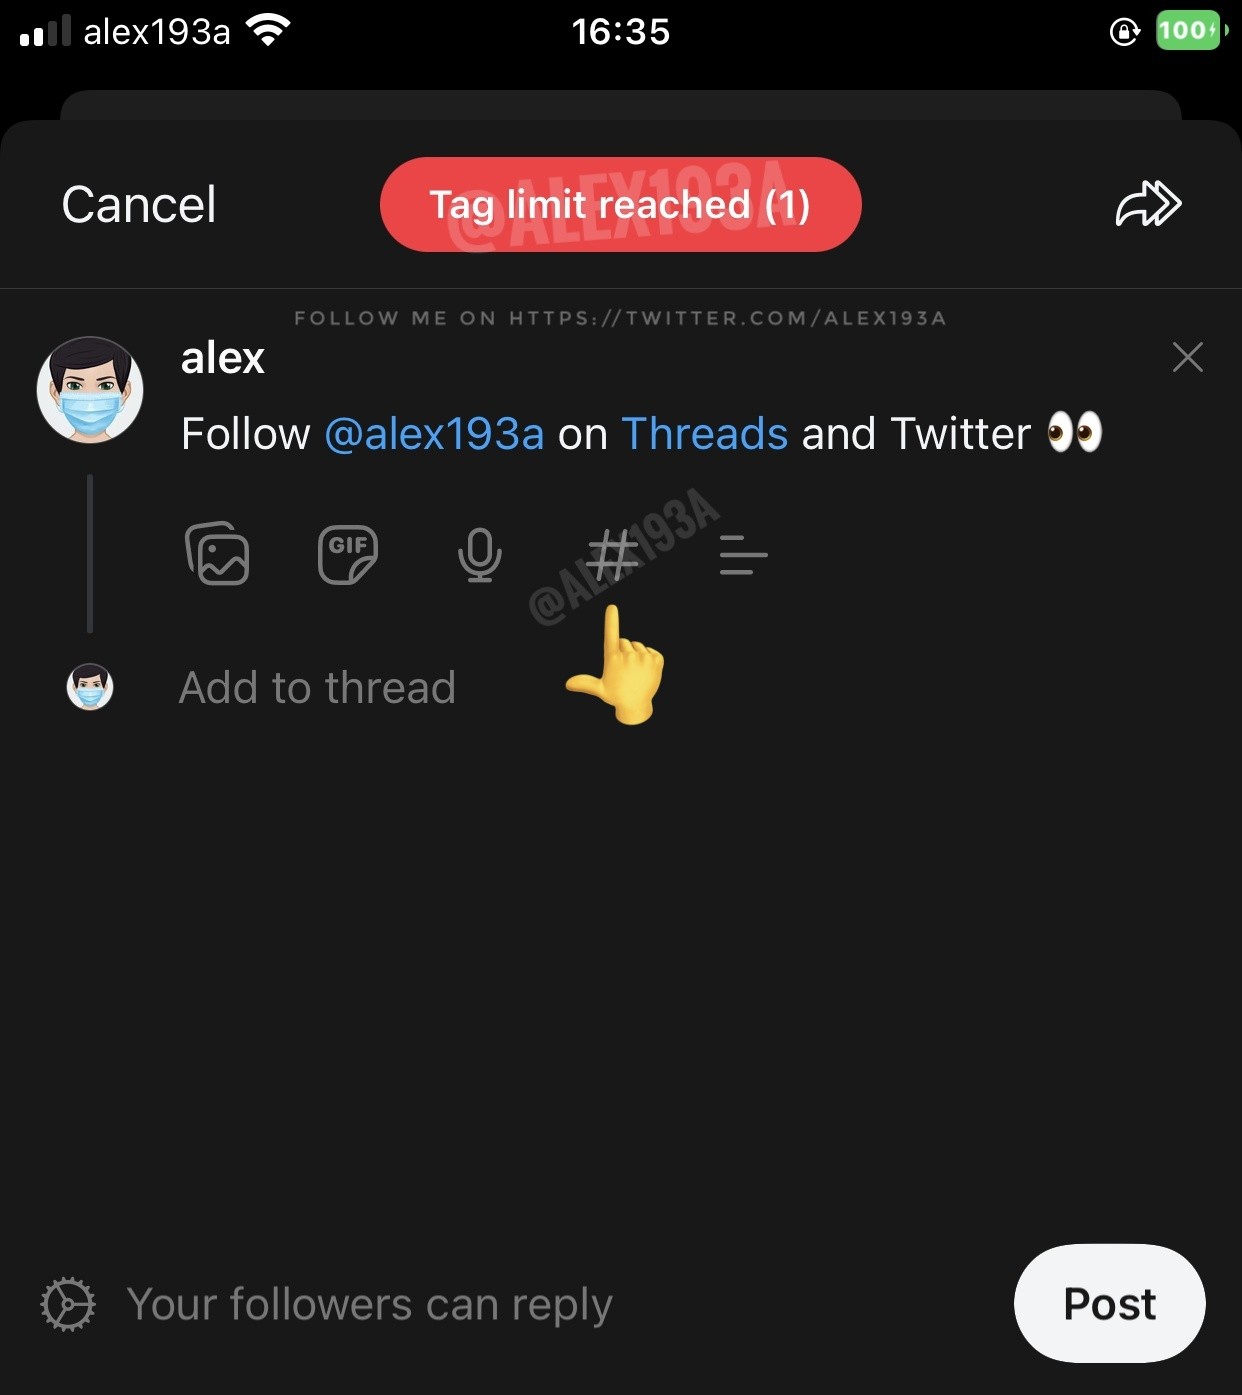 Alessandro Paluzzi on X: #Twitter is working on an option to remove  followers directly from their profile 👀  / X